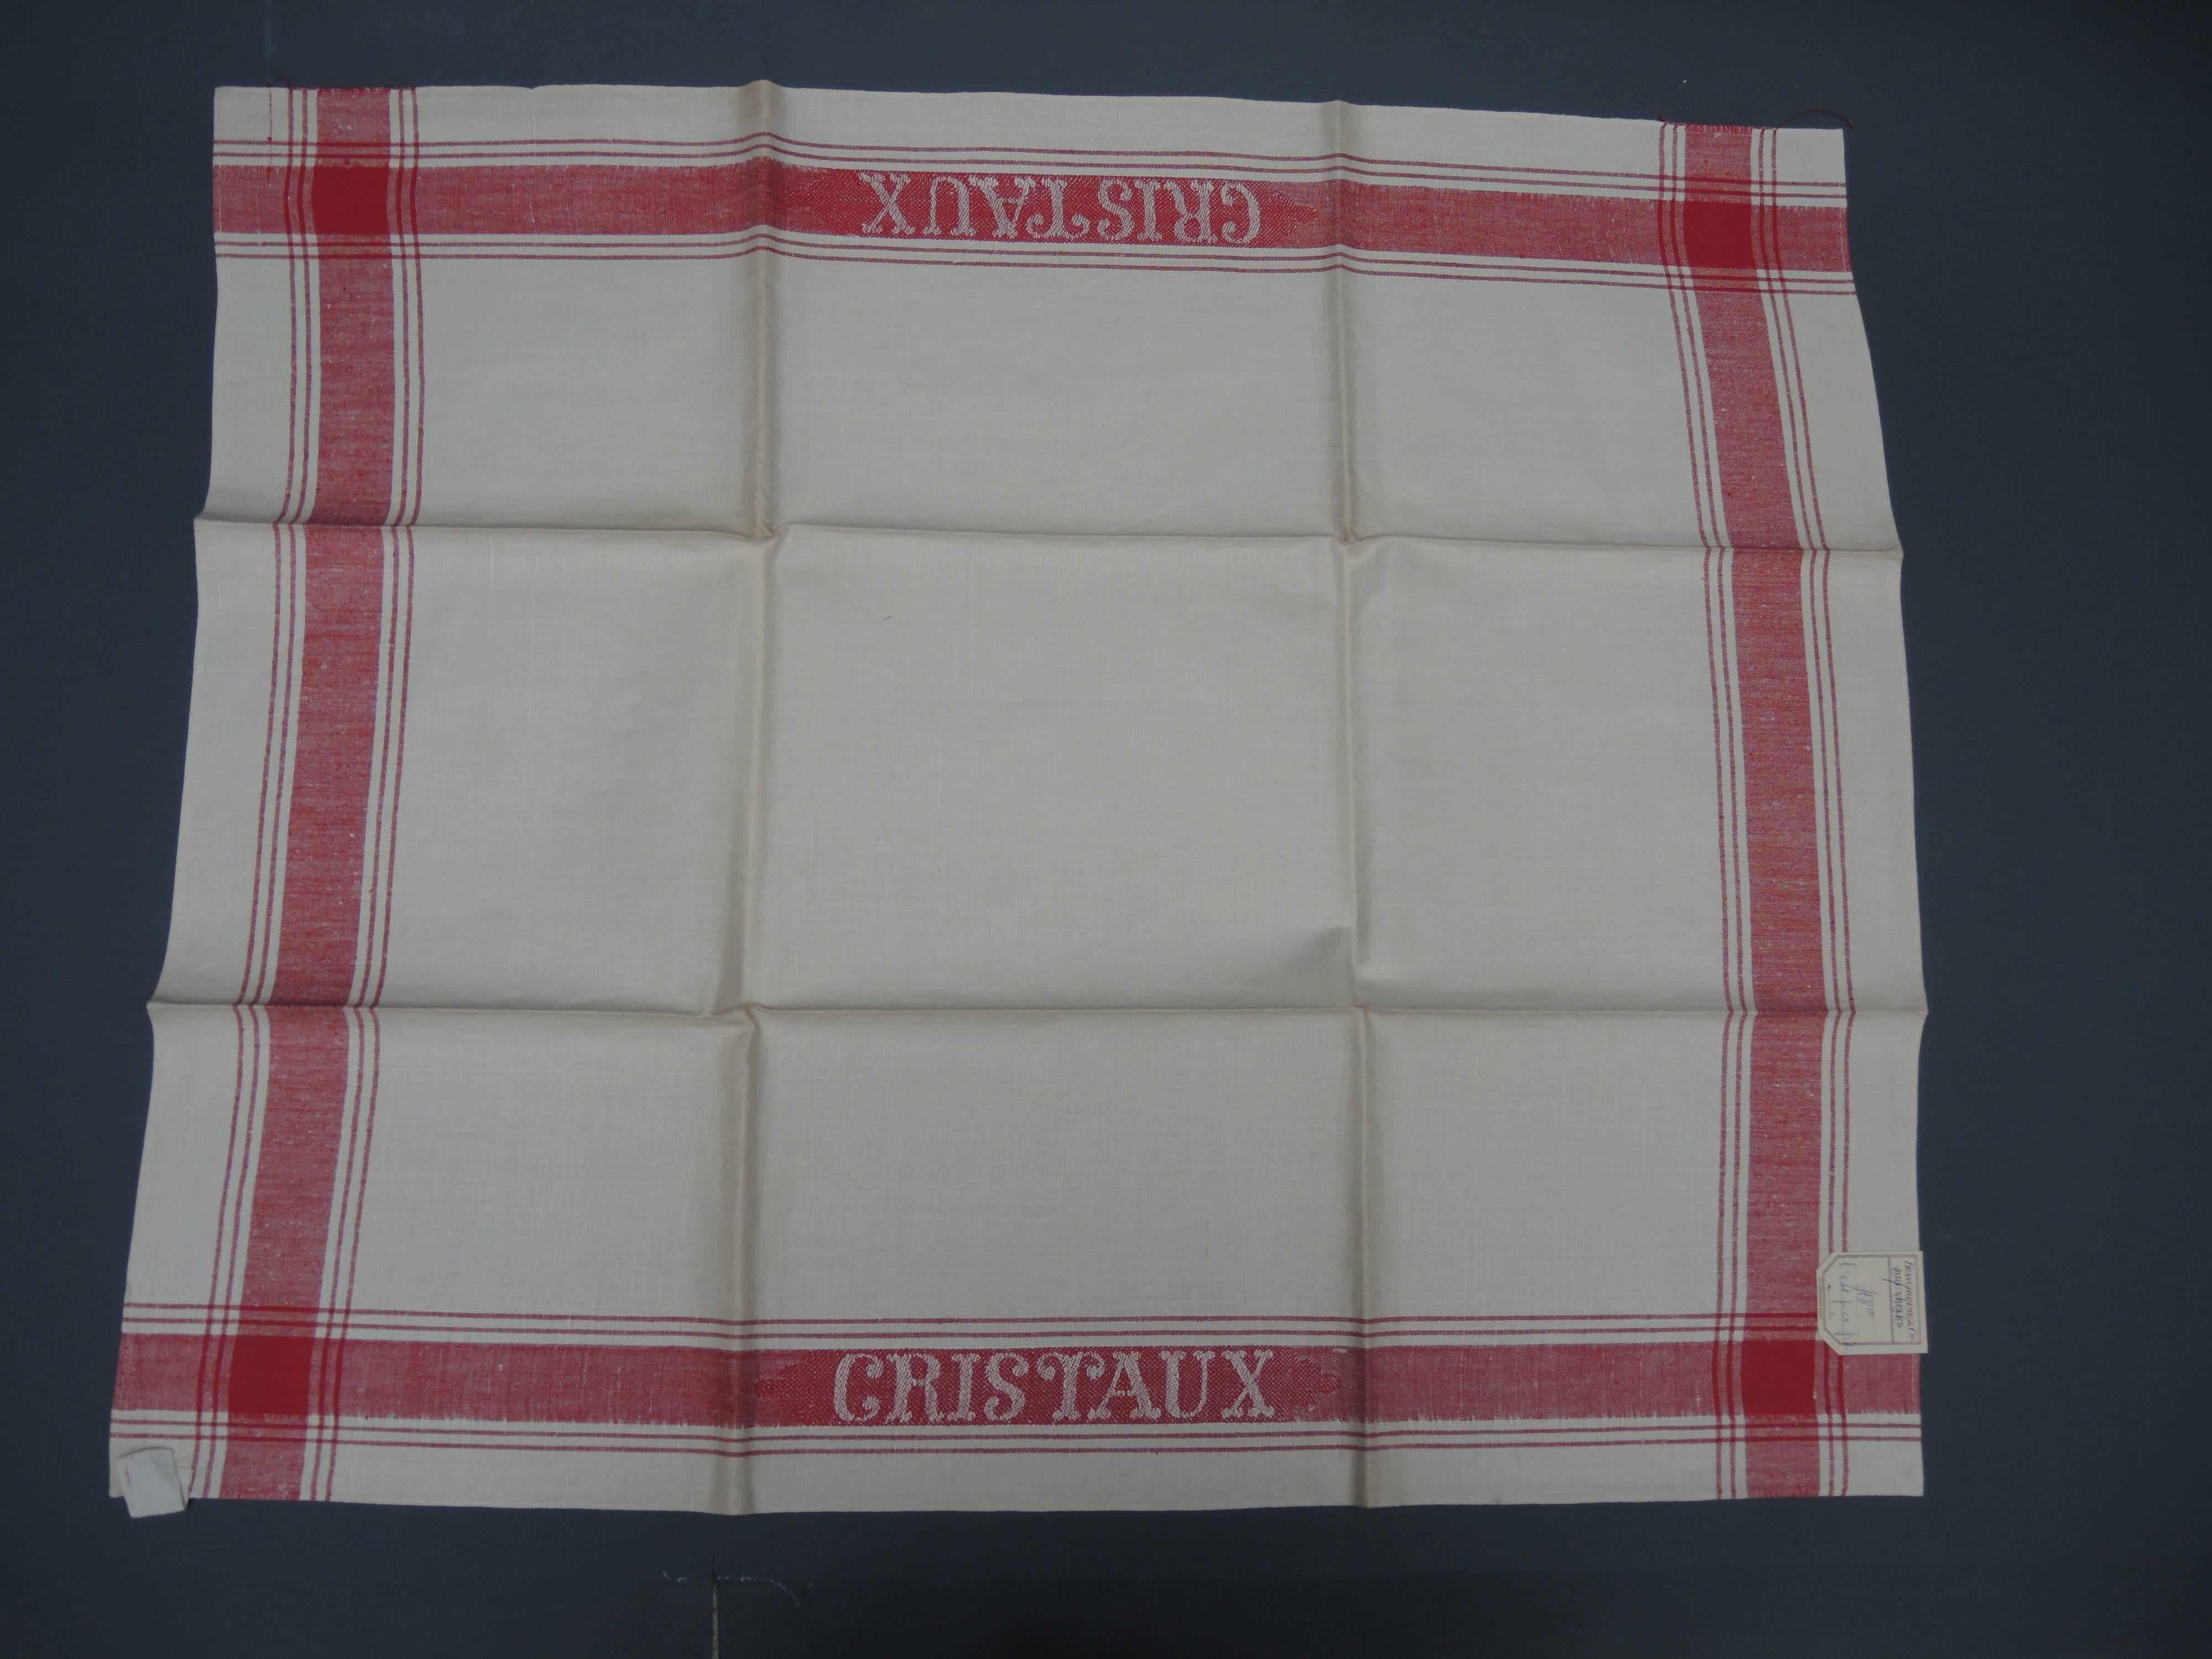 Three large Belgian linen kitchen towels damask Woven "Cristaux" (crystal in French)Never used, circa 1940 with the original tags from an old merchants stock.
 Belgian linen is considered the finest linen because of its fine texture and